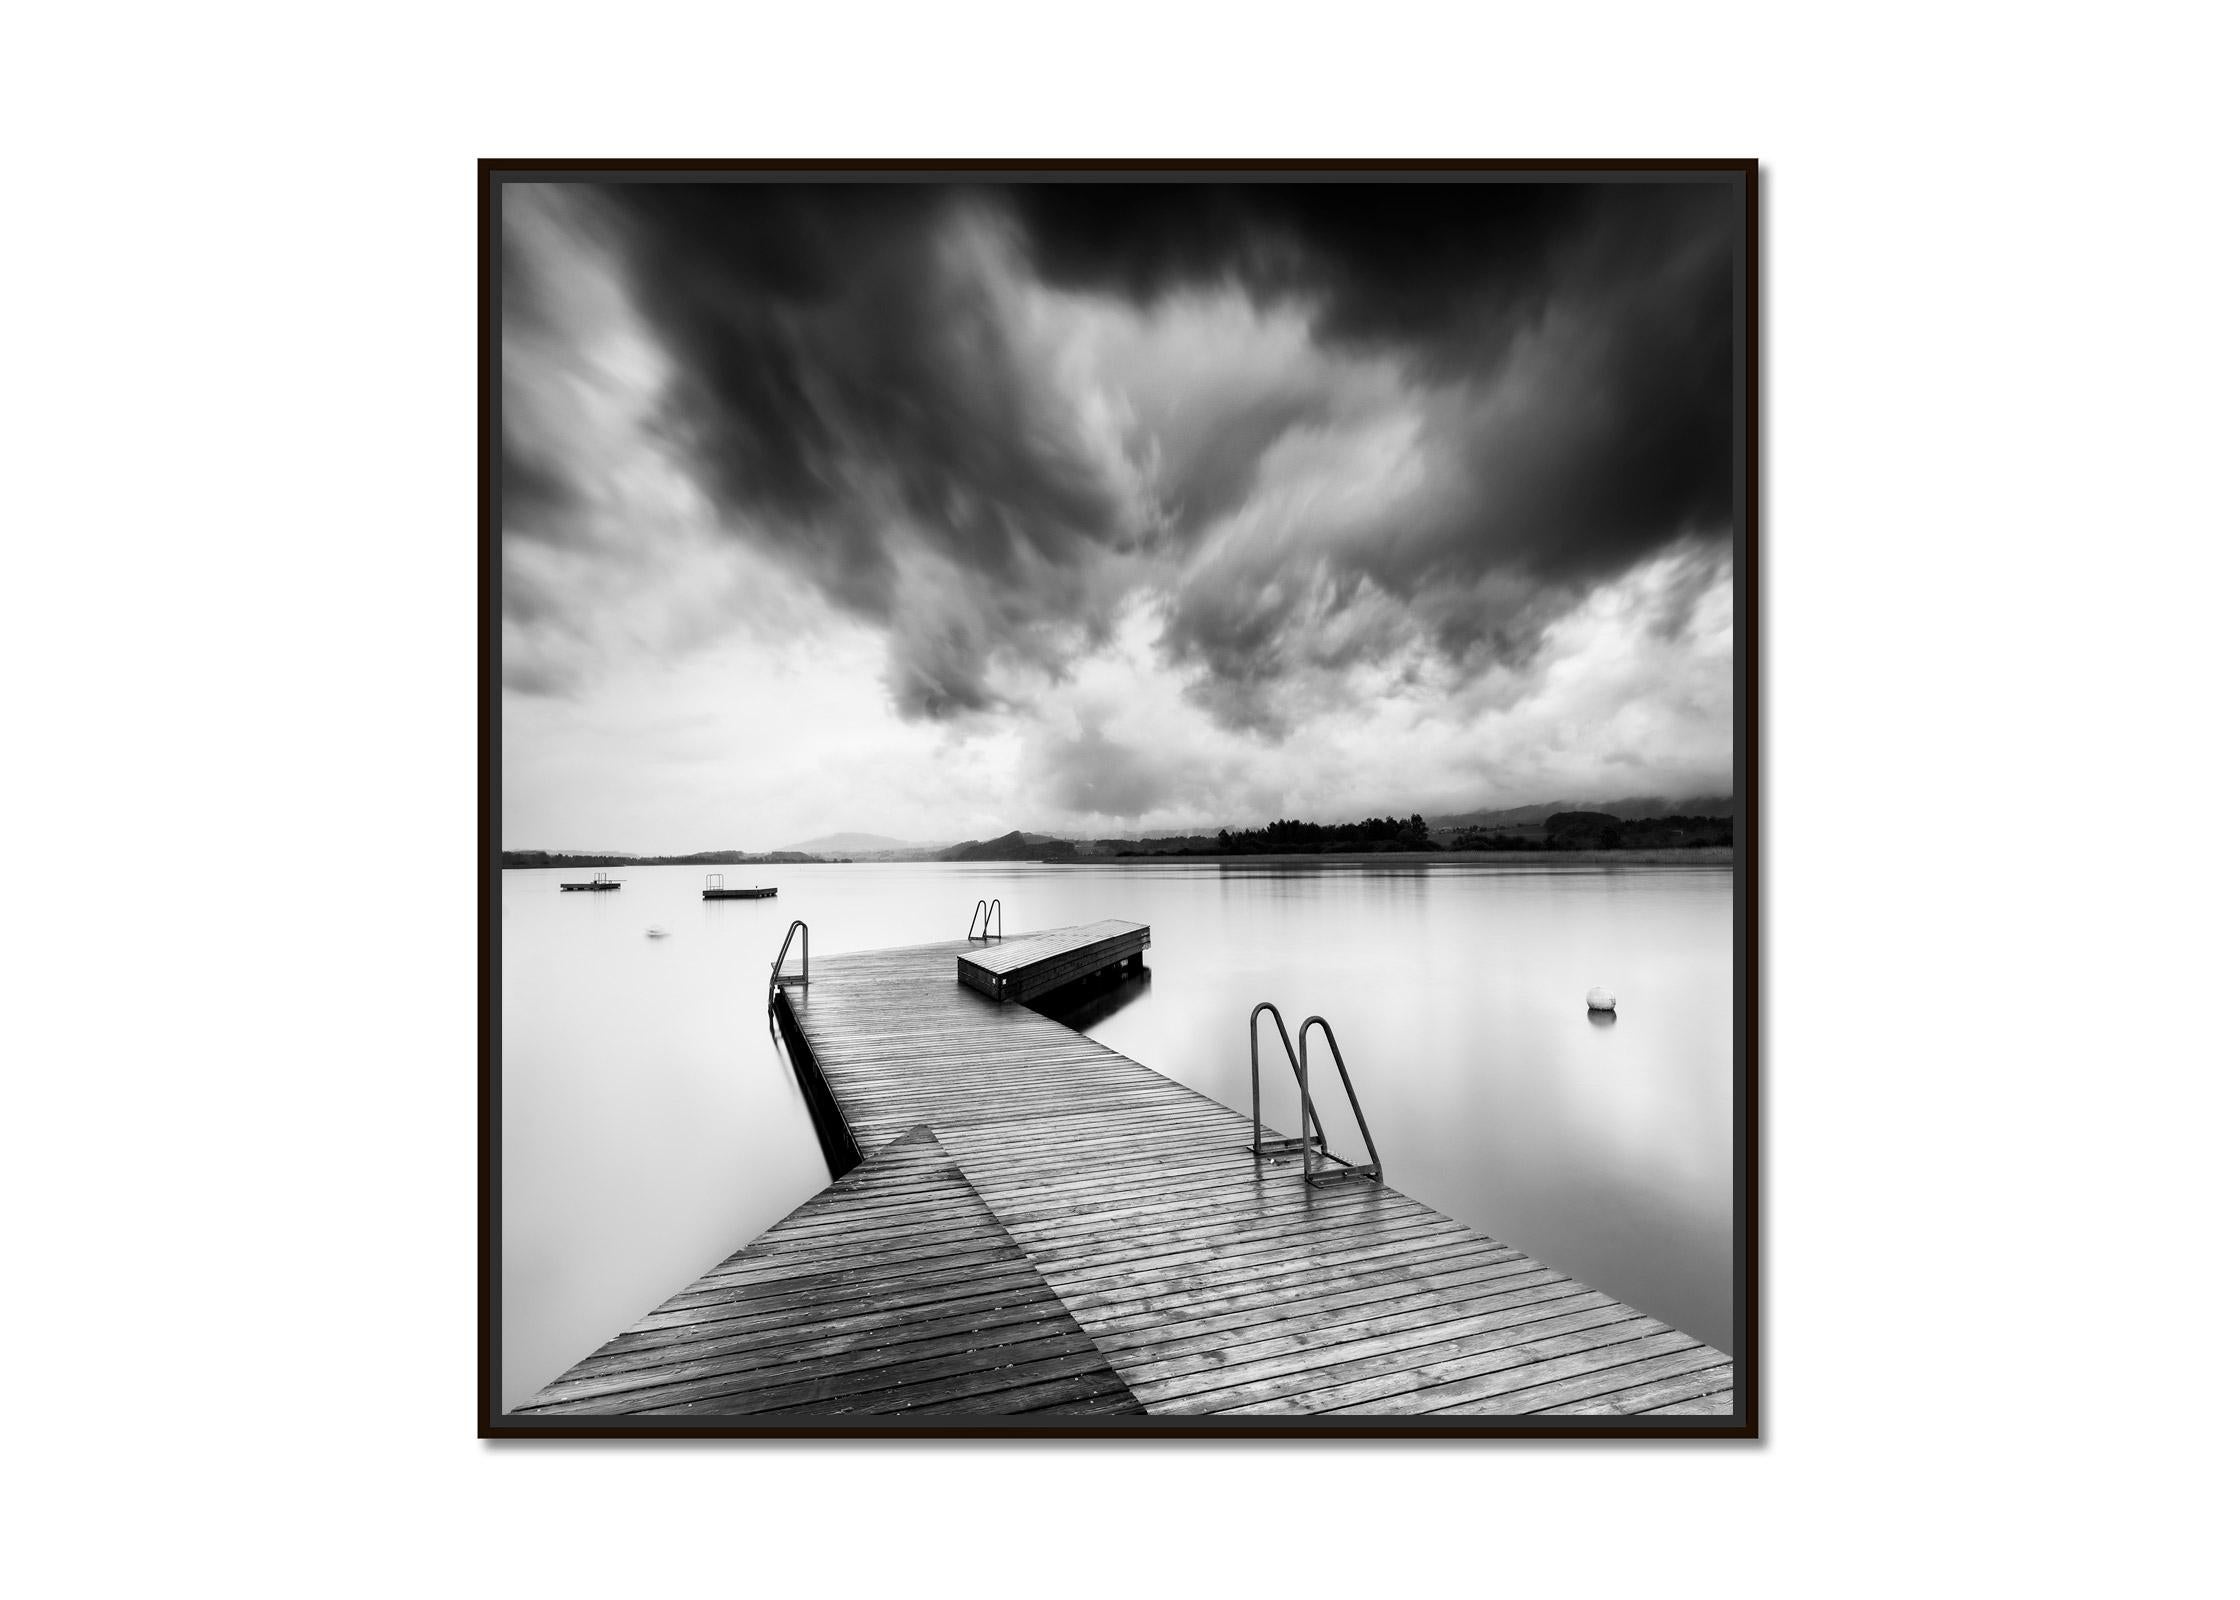 Wooden Pier during Storm, long exposure, black and white waterscape photography  - Photograph by Gerald Berghammer